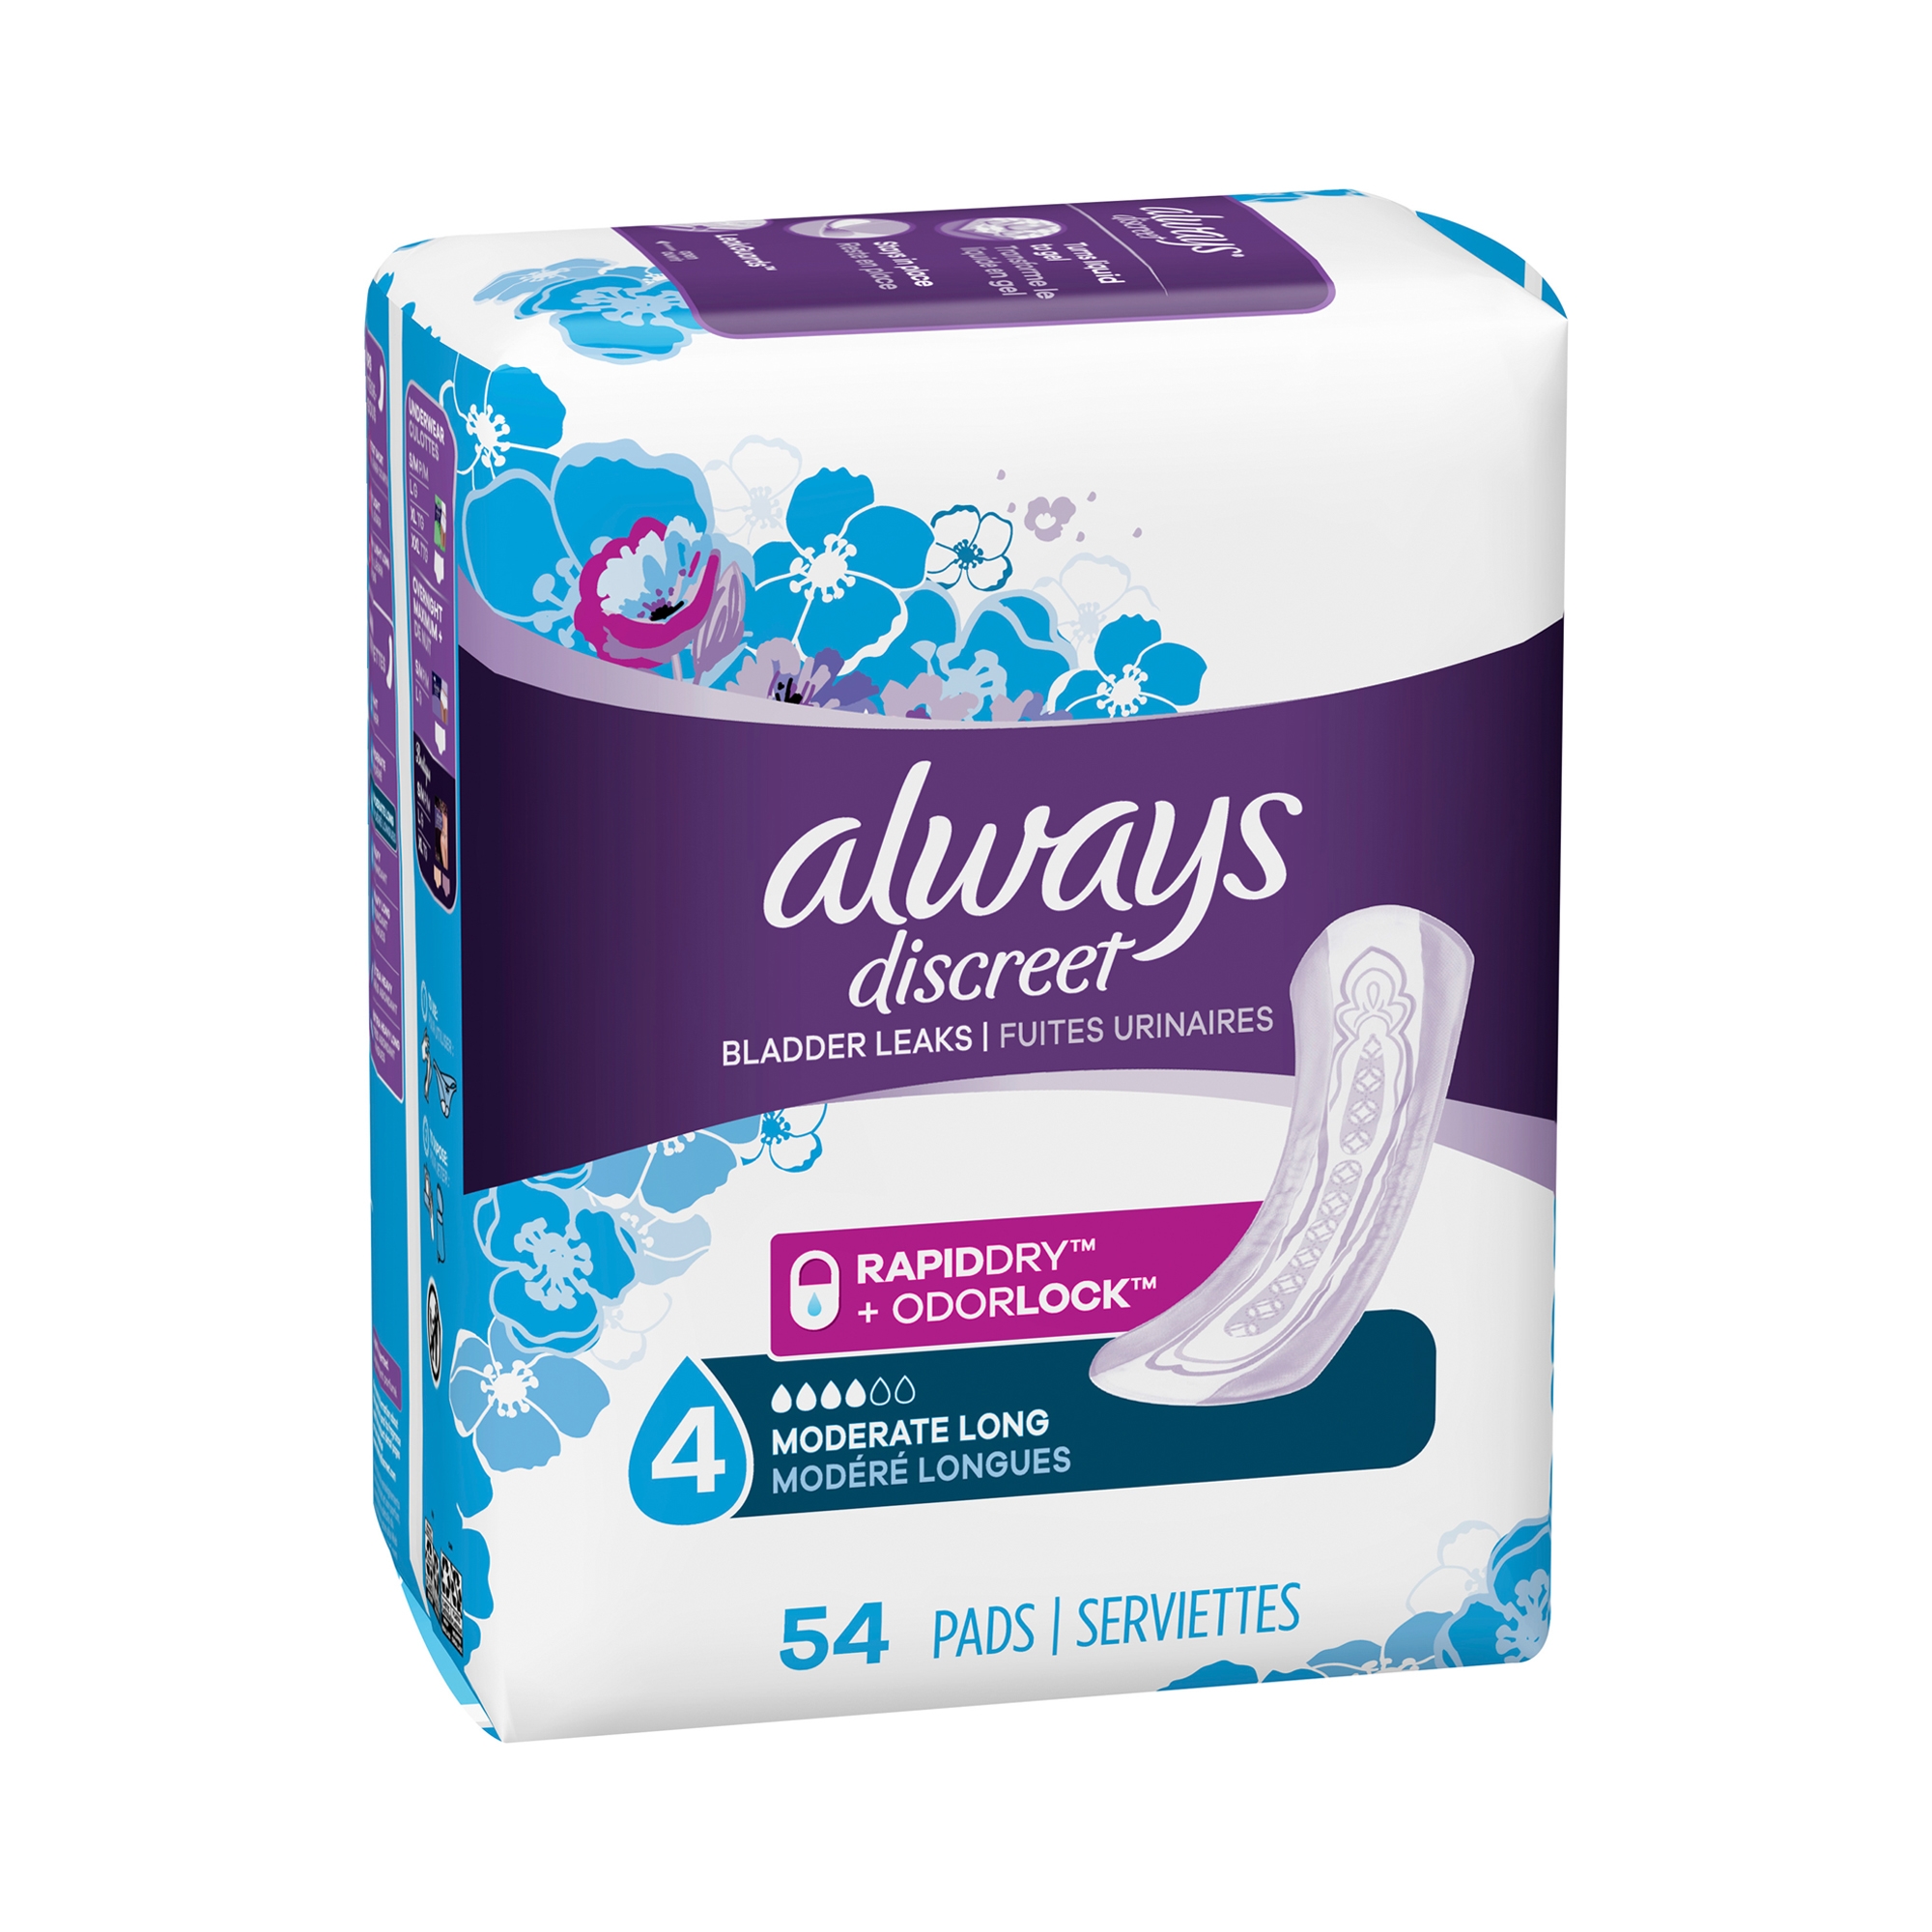 Prevail Daily Pads for Bladder Leaks, Disposable, Moderate